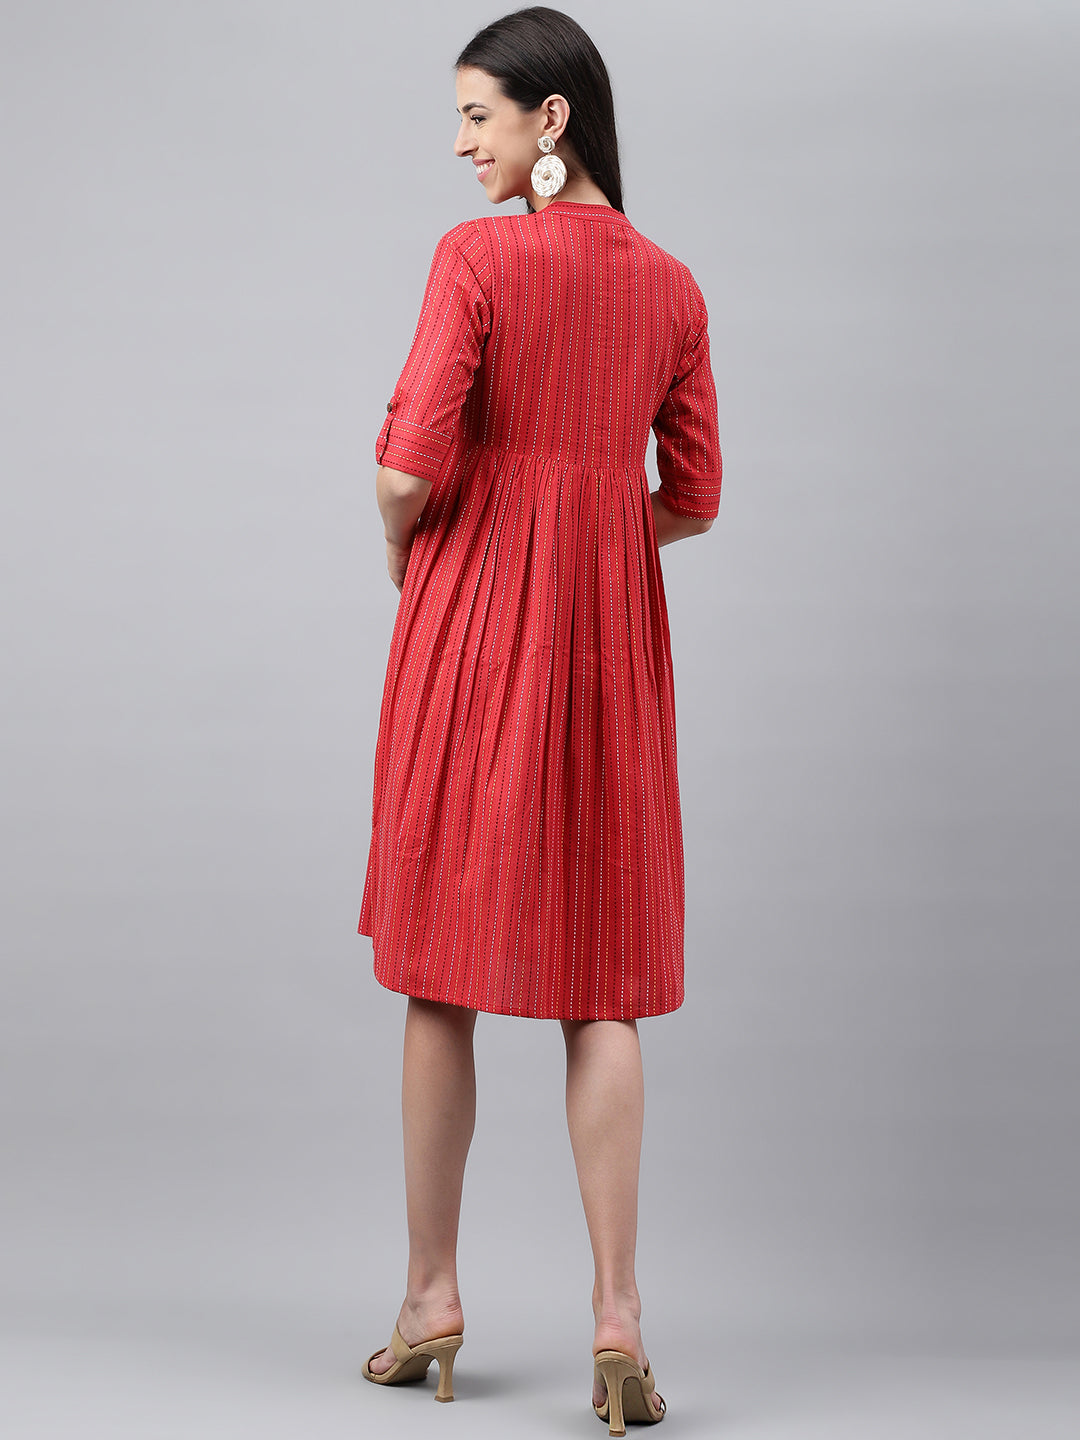 Red Cotton Woven Design Flared Casual Dress